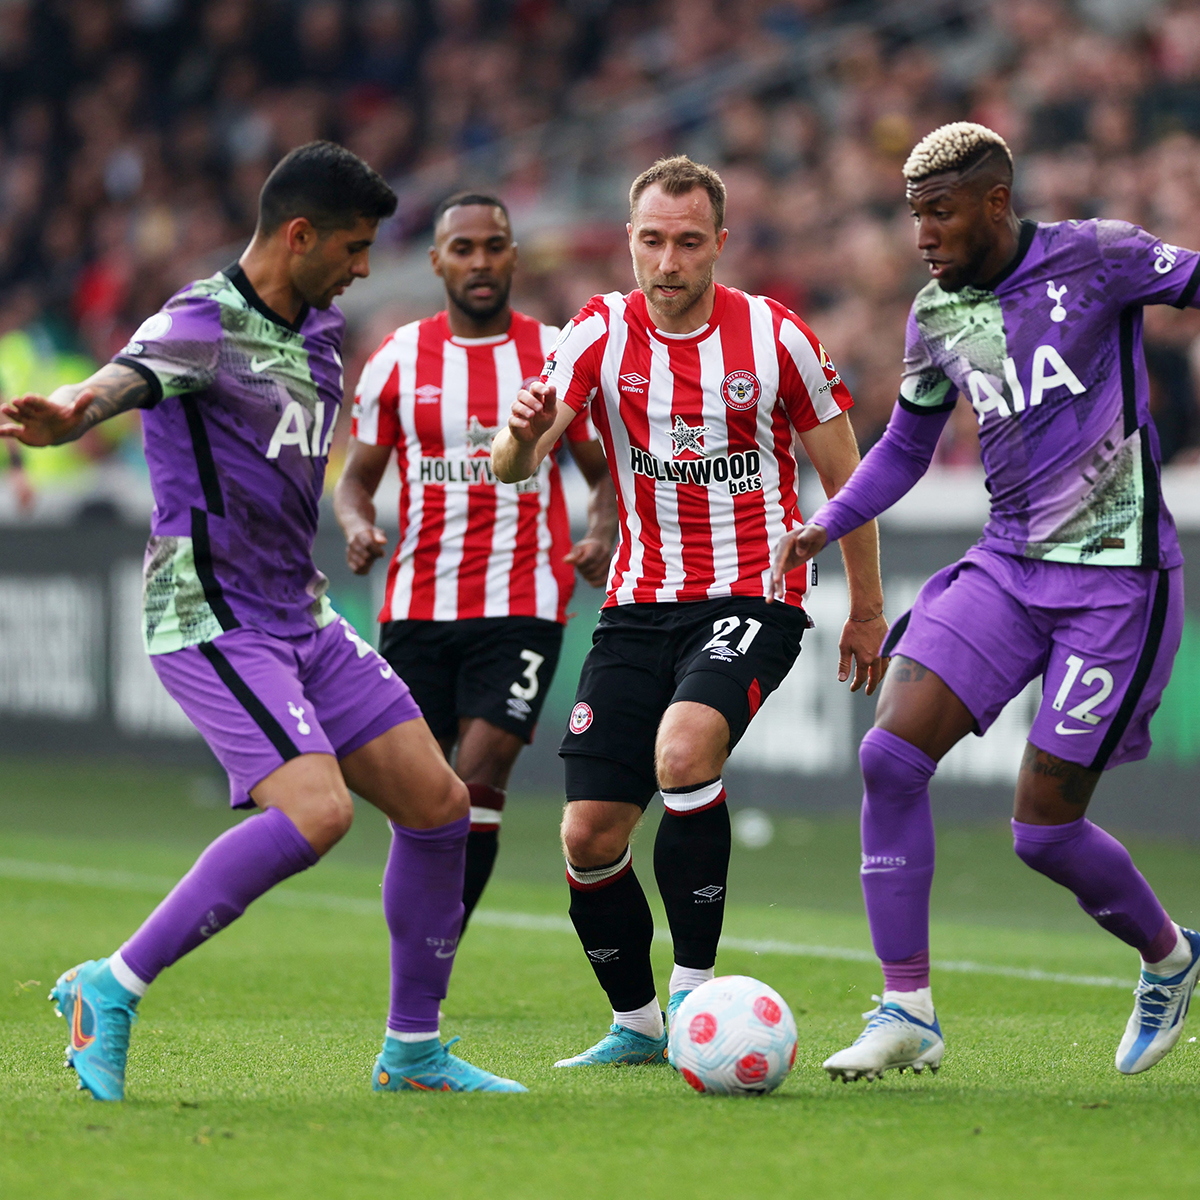 Premier League Highlights: Spurs held to a 0-0 draw against Brentford in a crucial Top-4 clash, Check Brentford vs Spurs HIGHLIGHTS